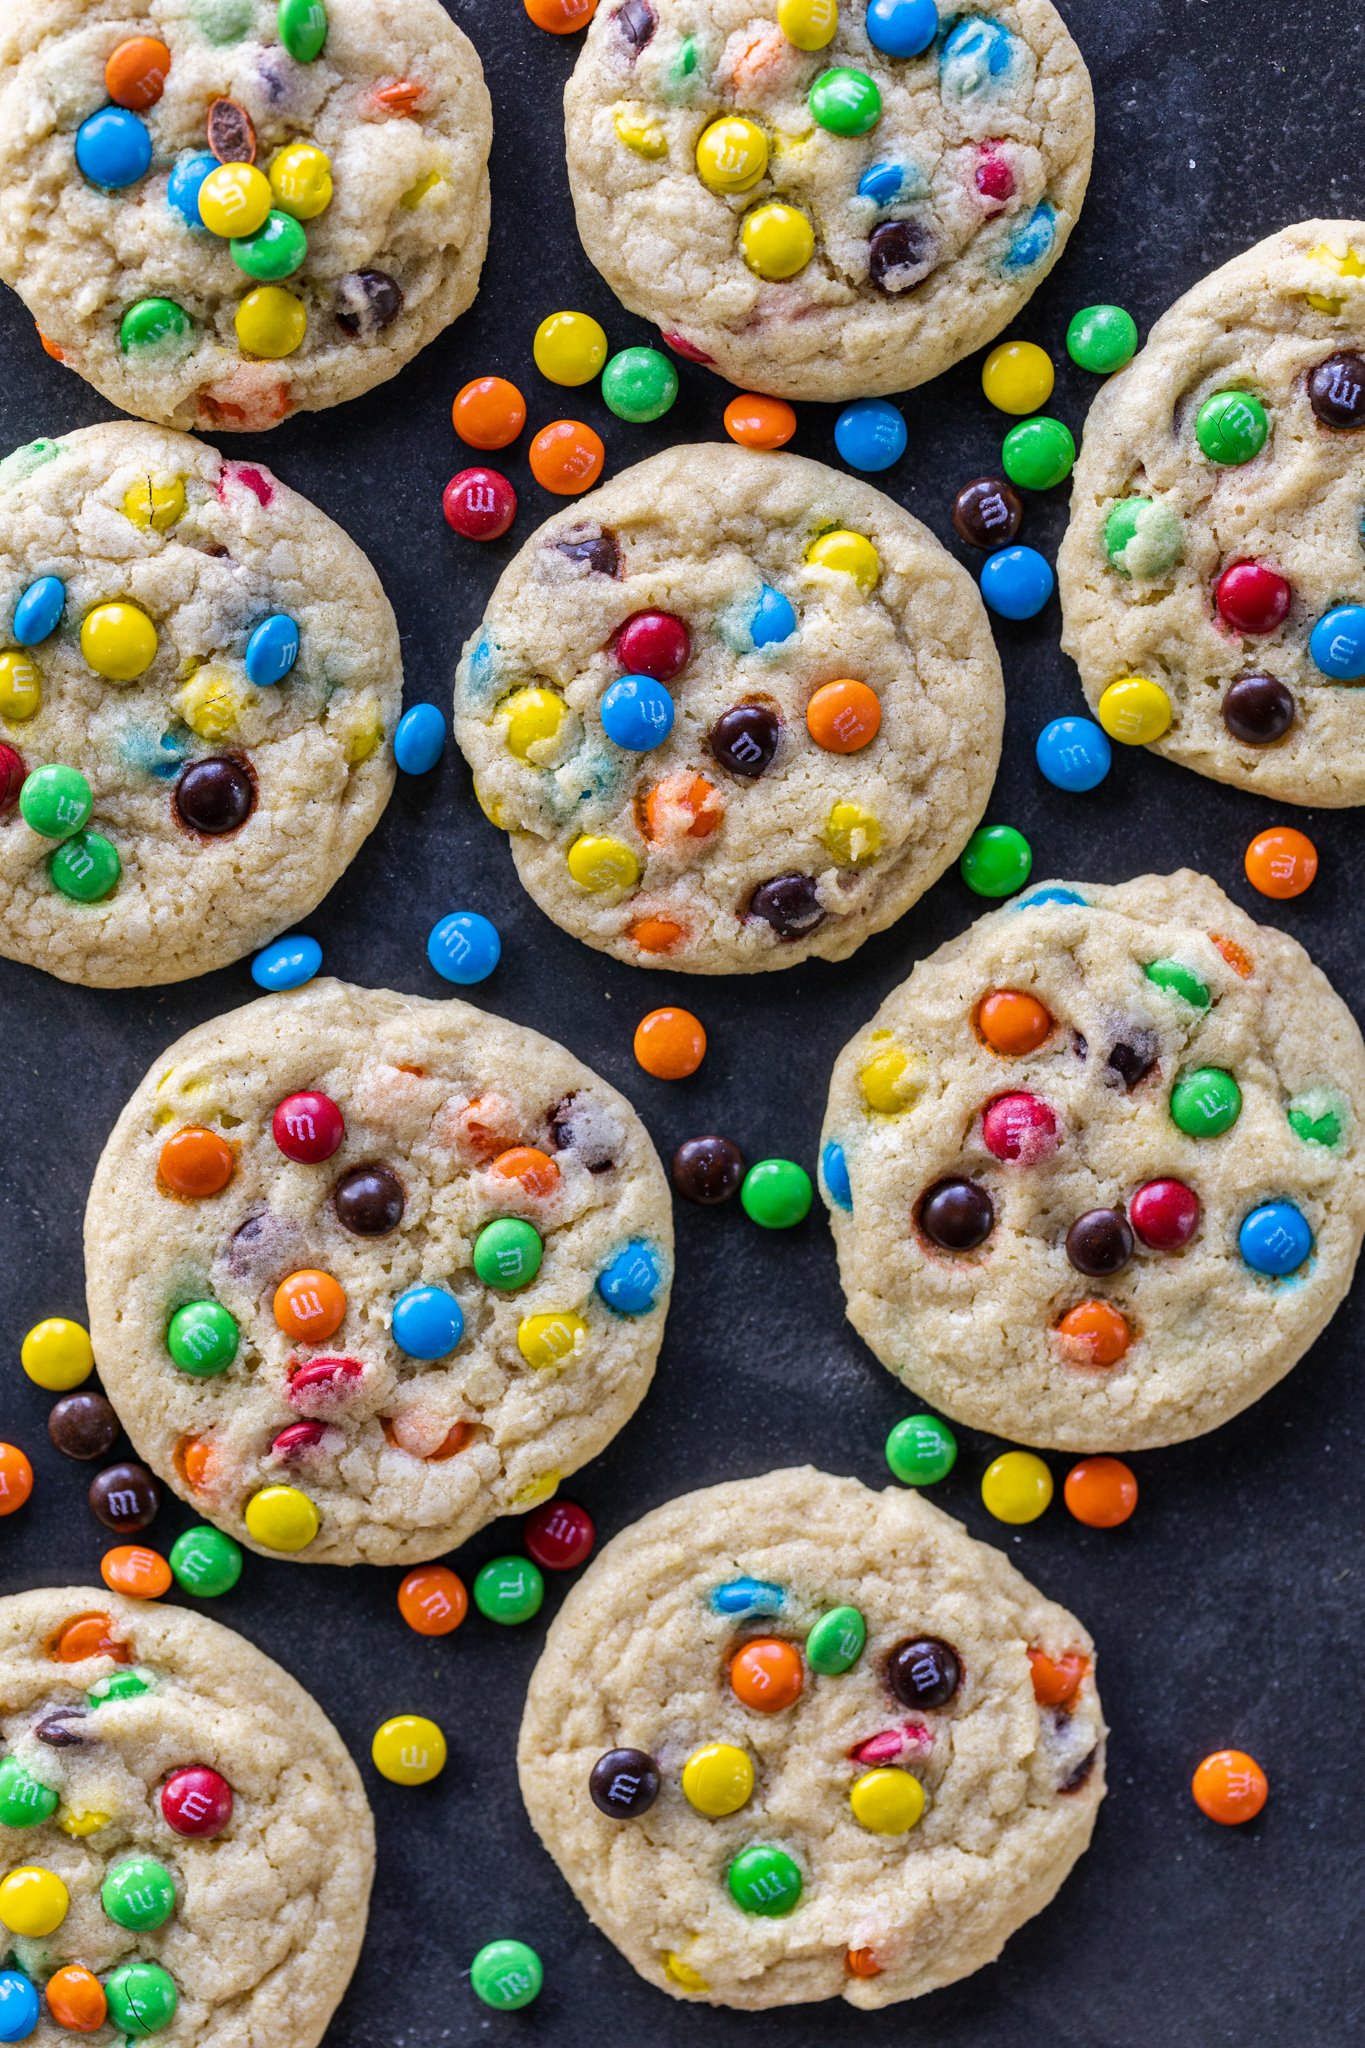 M&M Cookies: how to make it soft and chewy